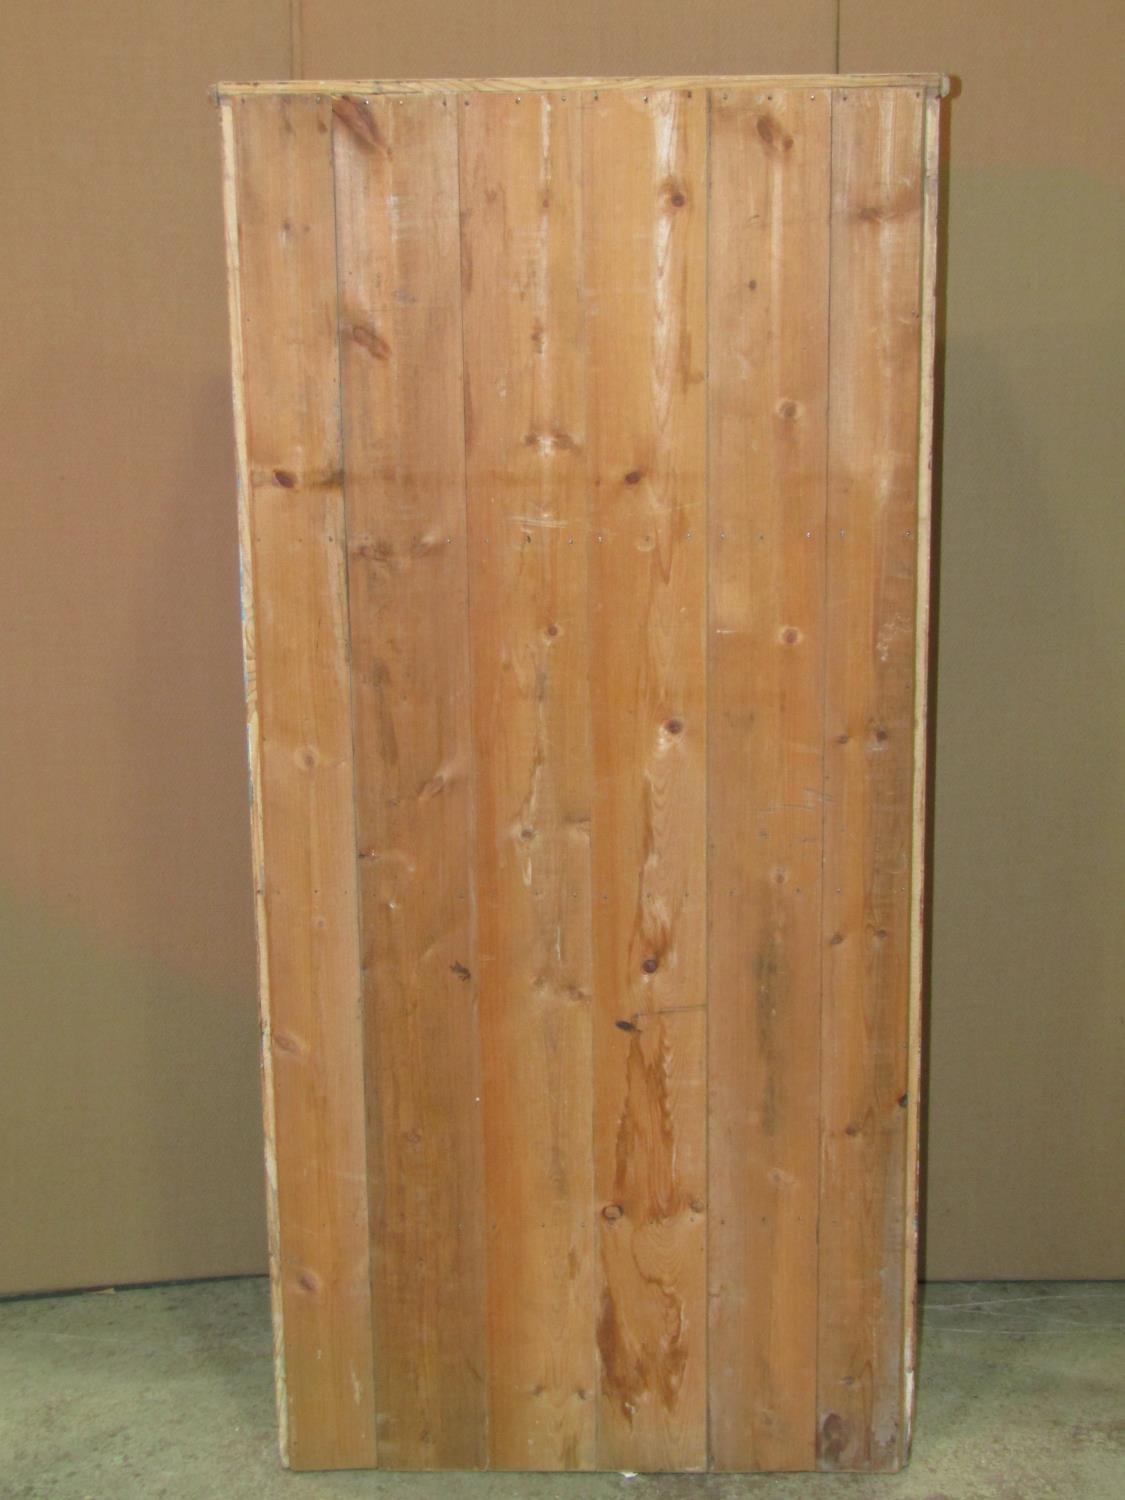 A stripped pine floorstanding shelf unit with three fixed sloping shelves, 63 cm wide x 28 cm x - Image 2 of 2